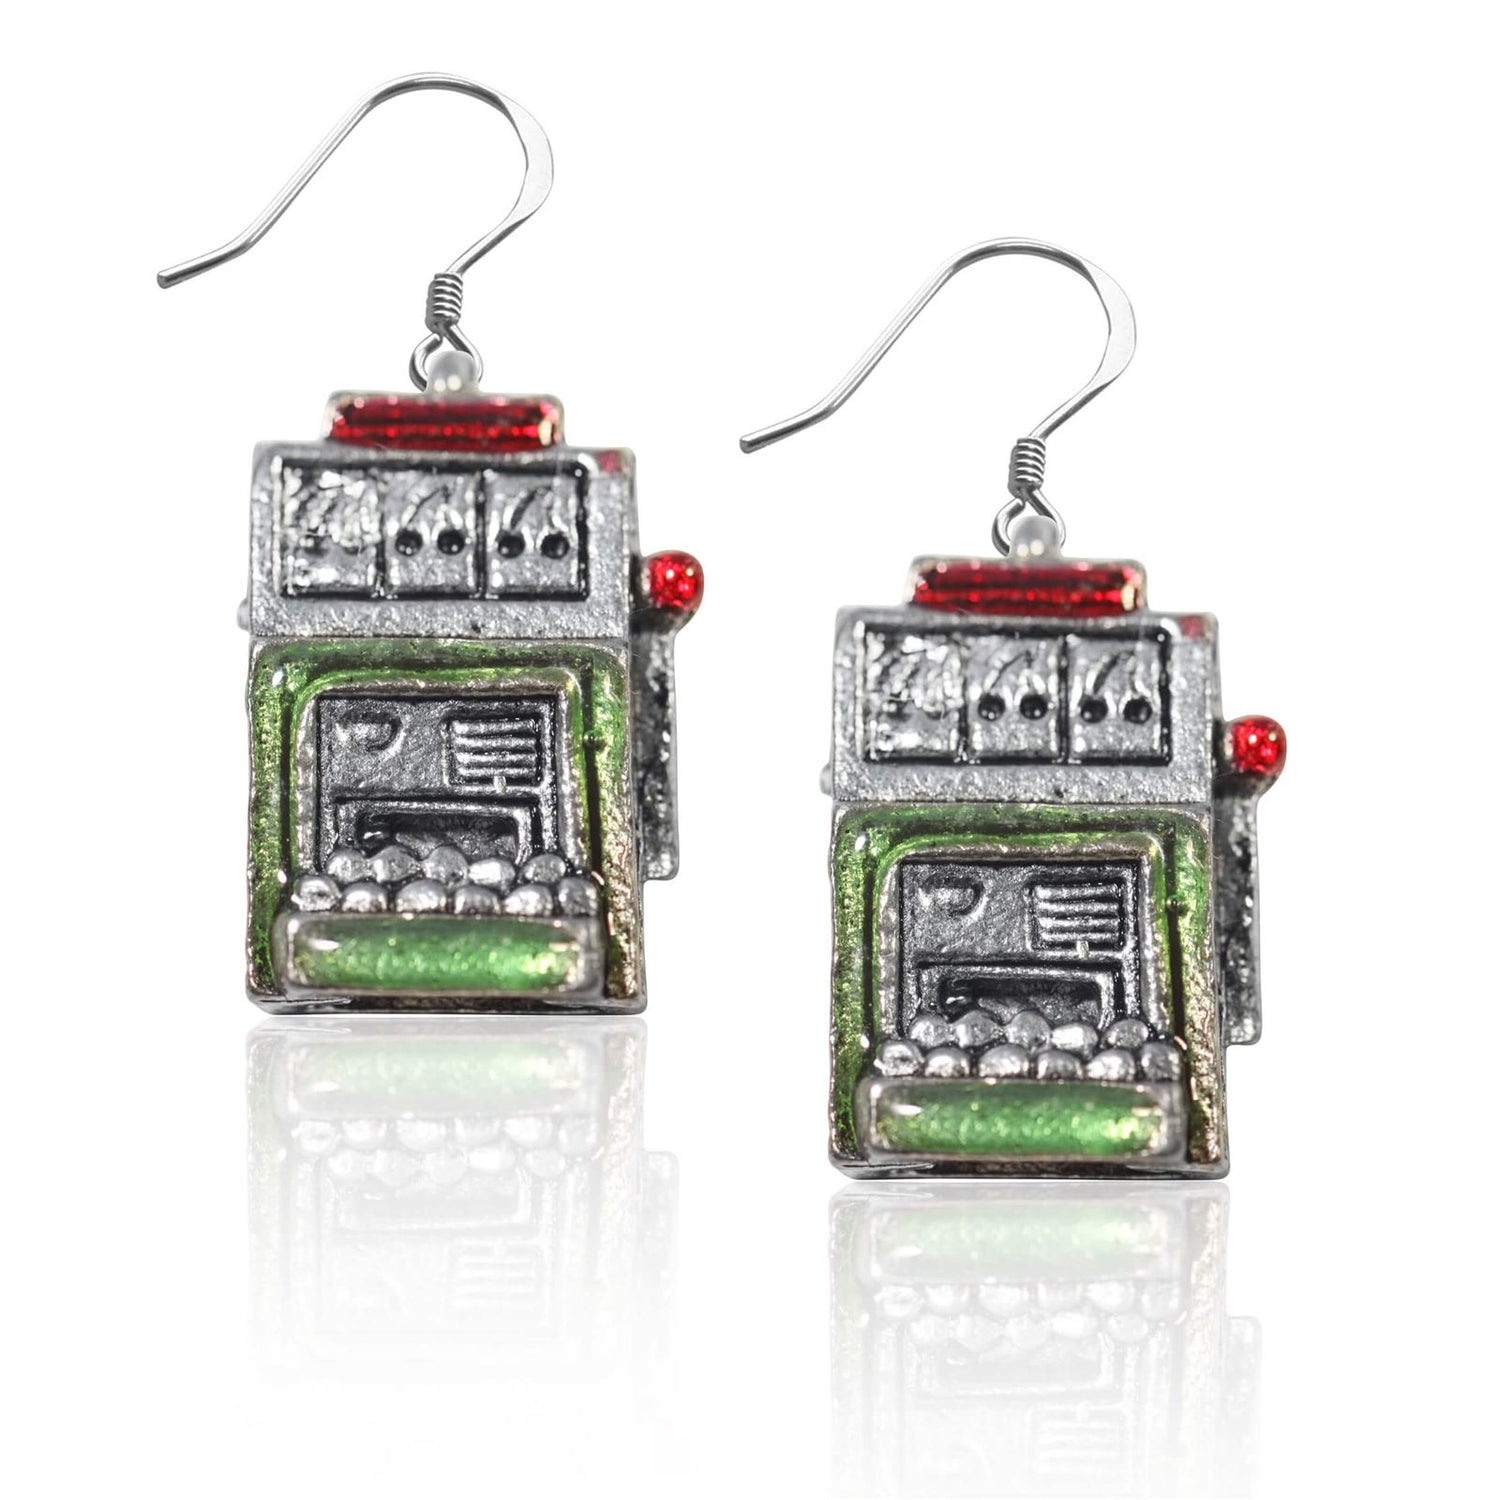 Whimsical Gifts | Slot Machine Charm Earrings in Silver Finish | Hobbies & Special Interests | Casino | Gaming | Game Night | Jewelry